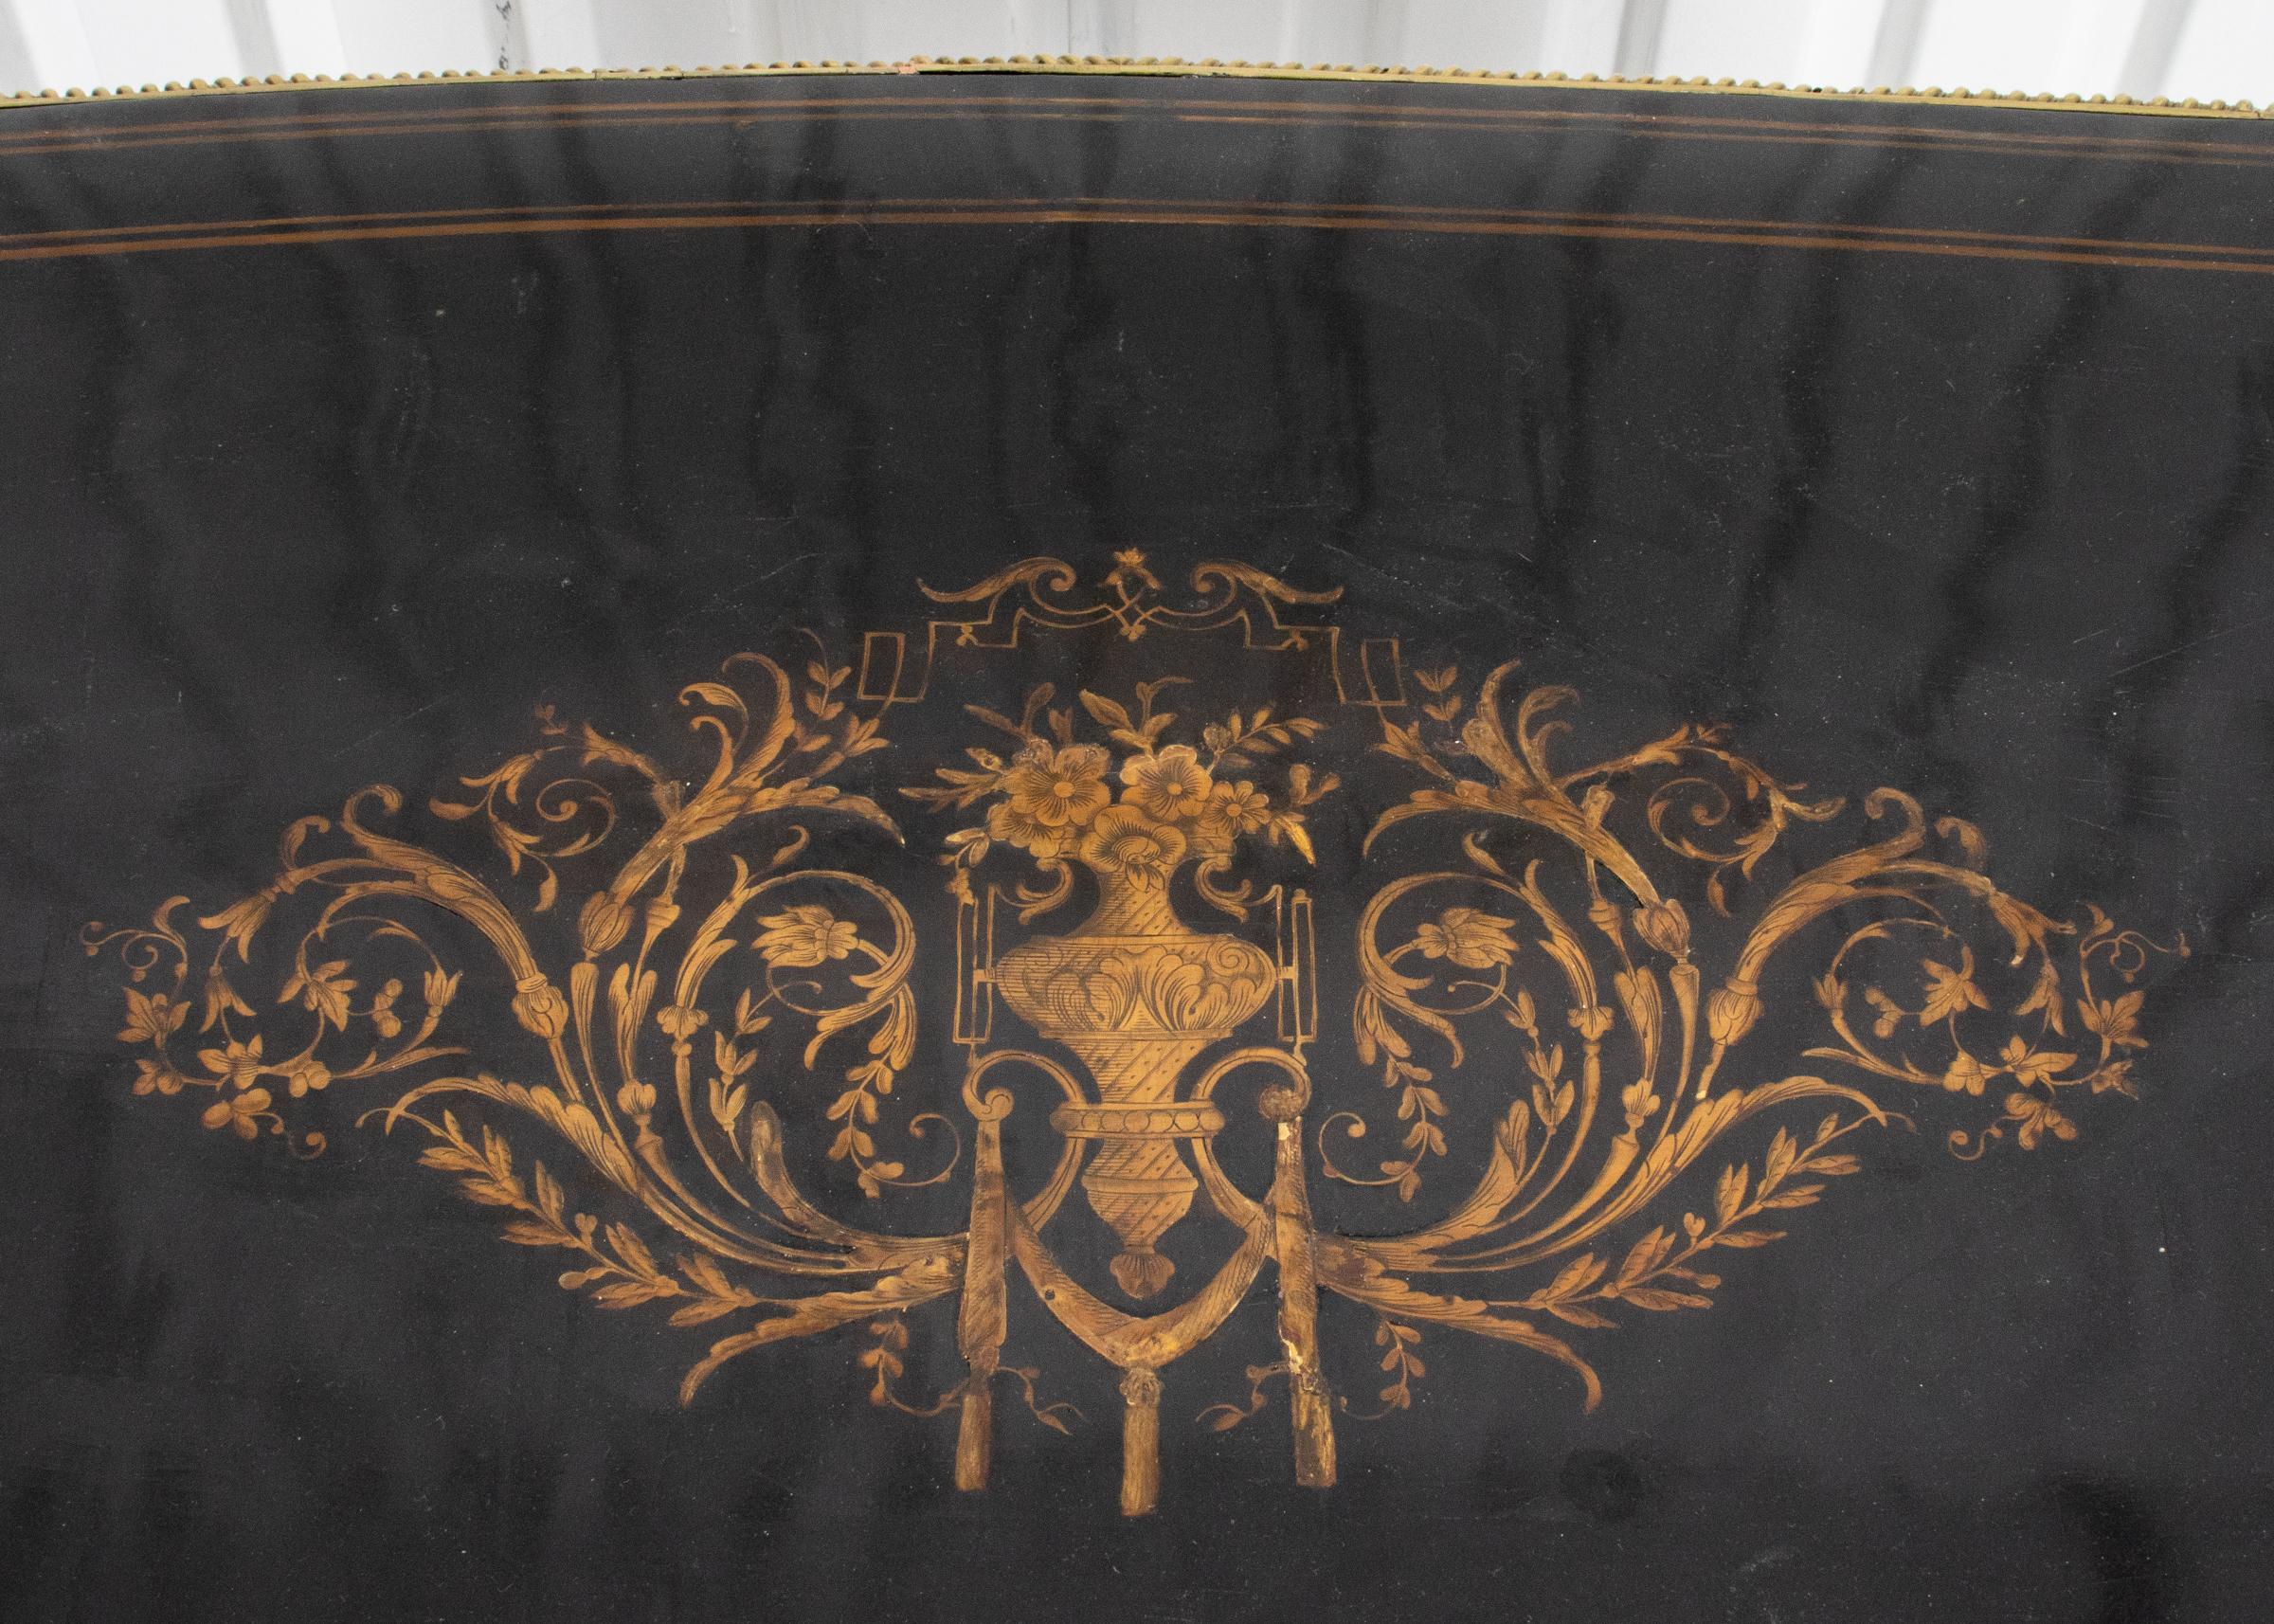 Napoleon III style ebonized bureau plat, the desk with foliate decoration to the top within striped borders above a single long drawer, overall with gilt bronze and gilt metal mounts on cabriole legs. 30” H x 50” W x 27.5” D. Provenance: Removed